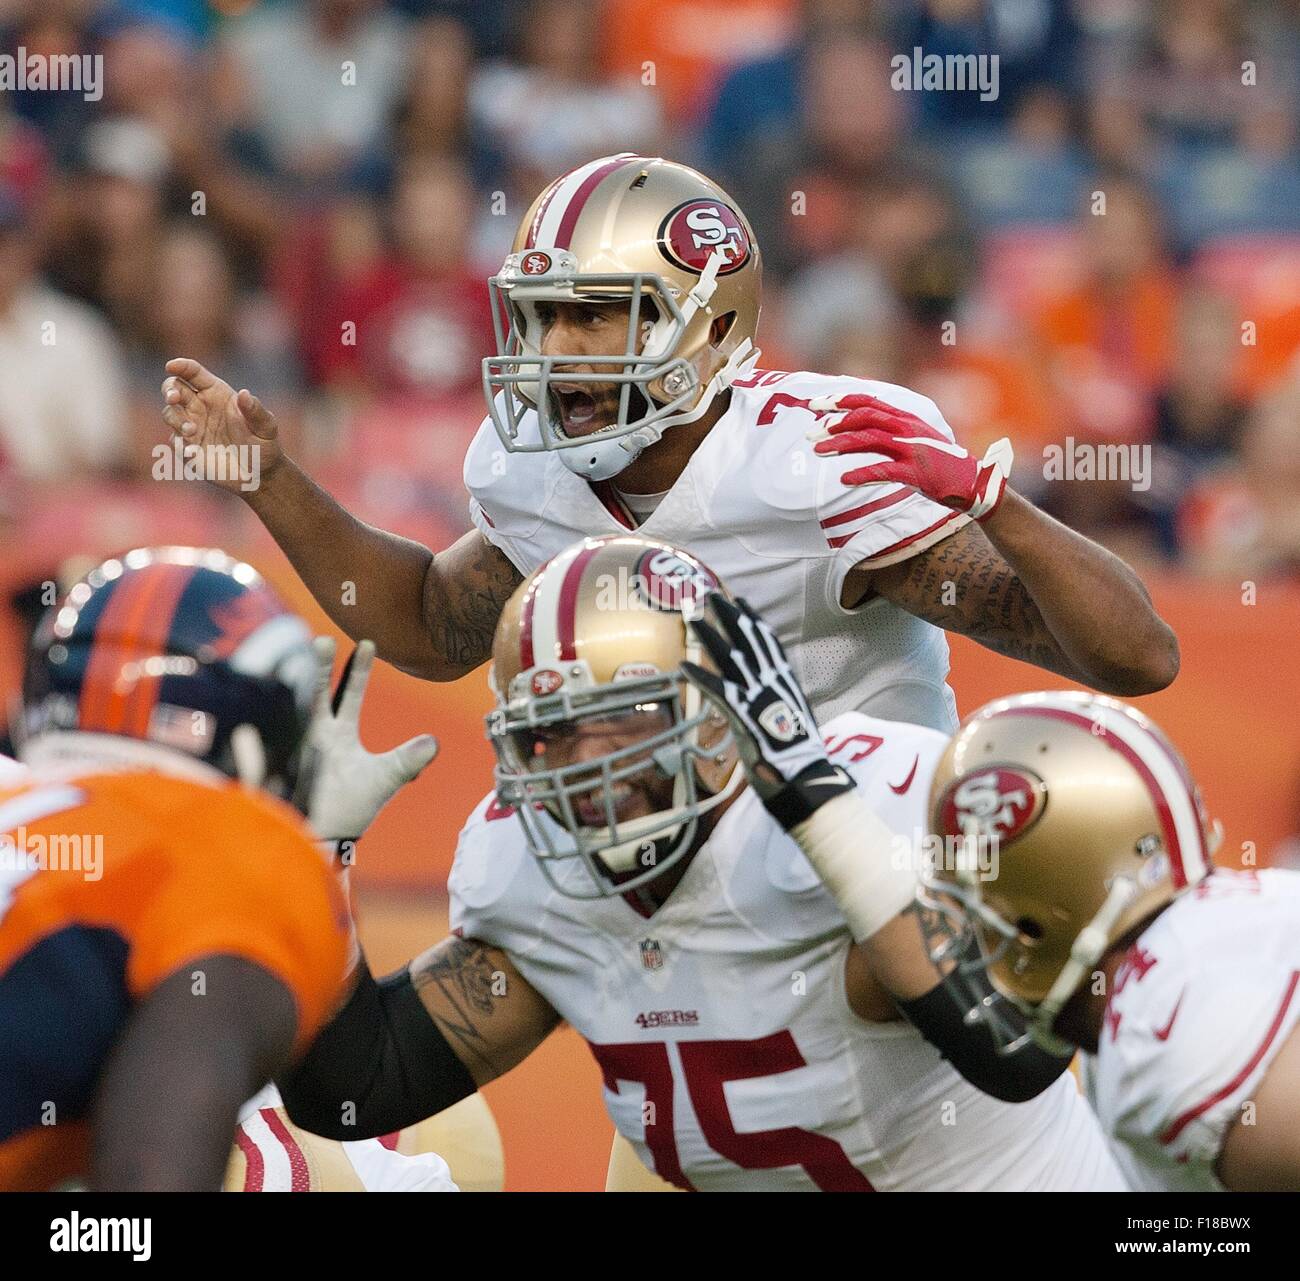 Denver, Colorado, USA. 29th Aug, 2015. San Francisco QB COLIN KAEPERNICK, center, yells at his Offensive Line about a possible Blitz during the 1st. Half at Sports Authority Field at Mile High Saturday night. the Broncos beat the 49ers in Pre-Season play 19-12. Credit:  Hector Acevedo/ZUMA Wire/Alamy Live News Stock Photo